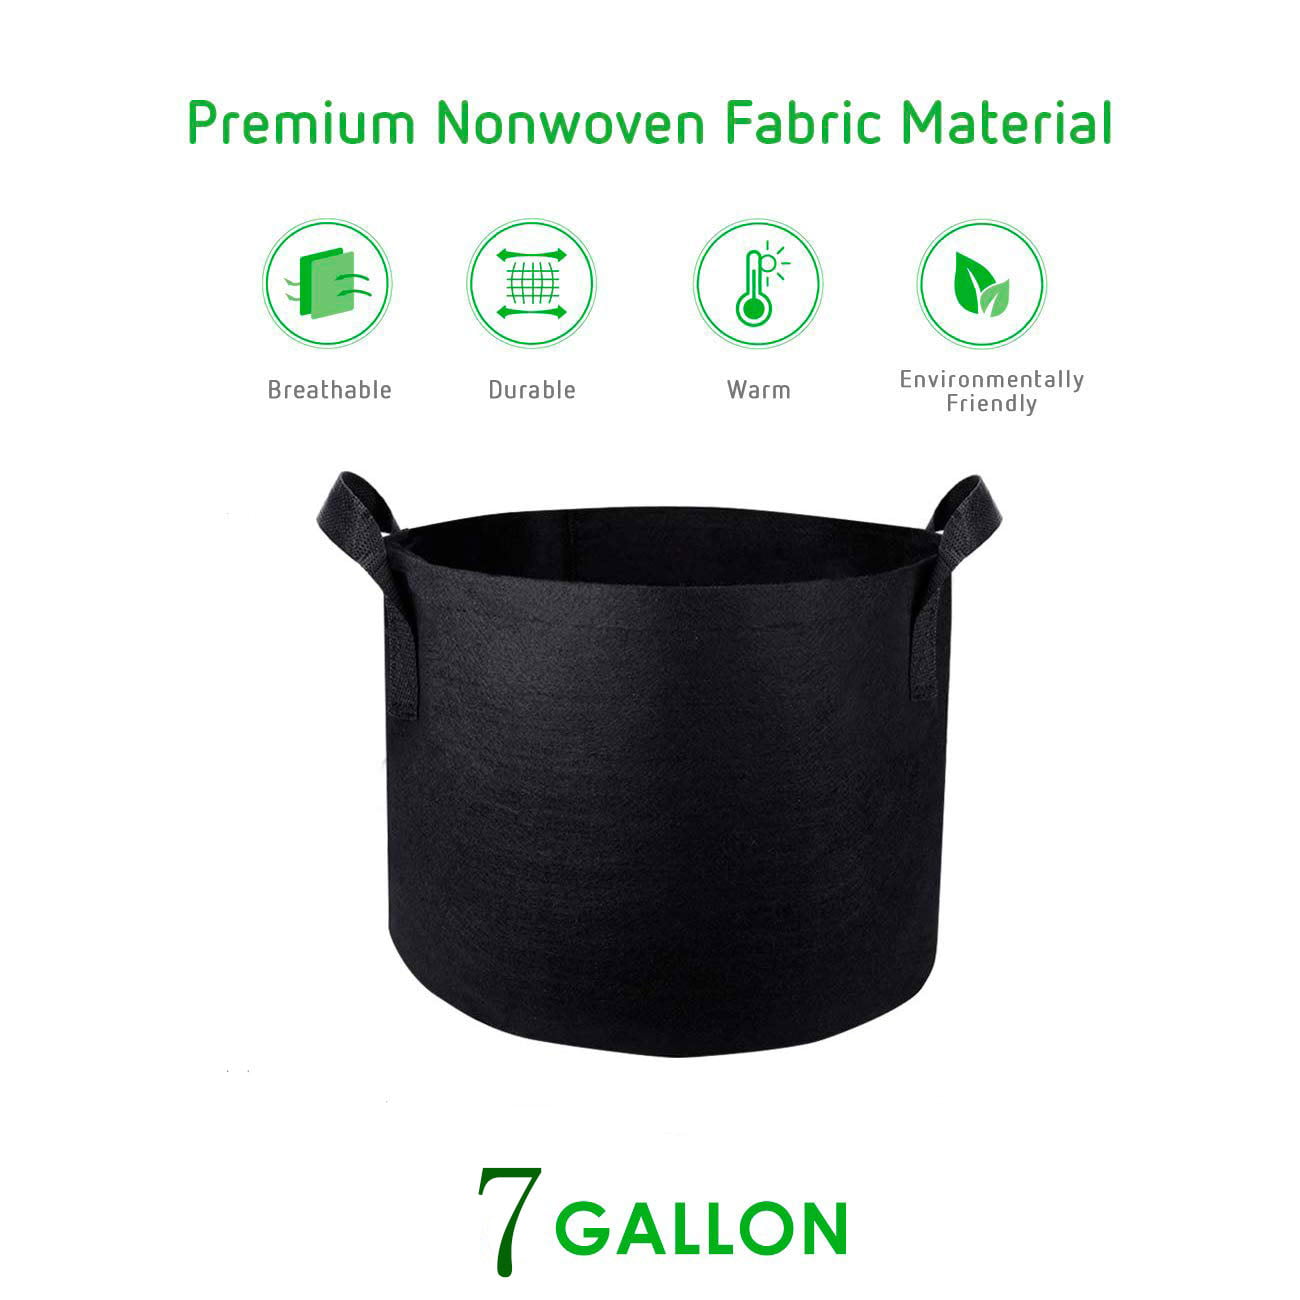 EACHON 7 Gallon 7-Pack Fabric Grow Pot Nonwoven Plant Grow Bags for Plant with Handles 